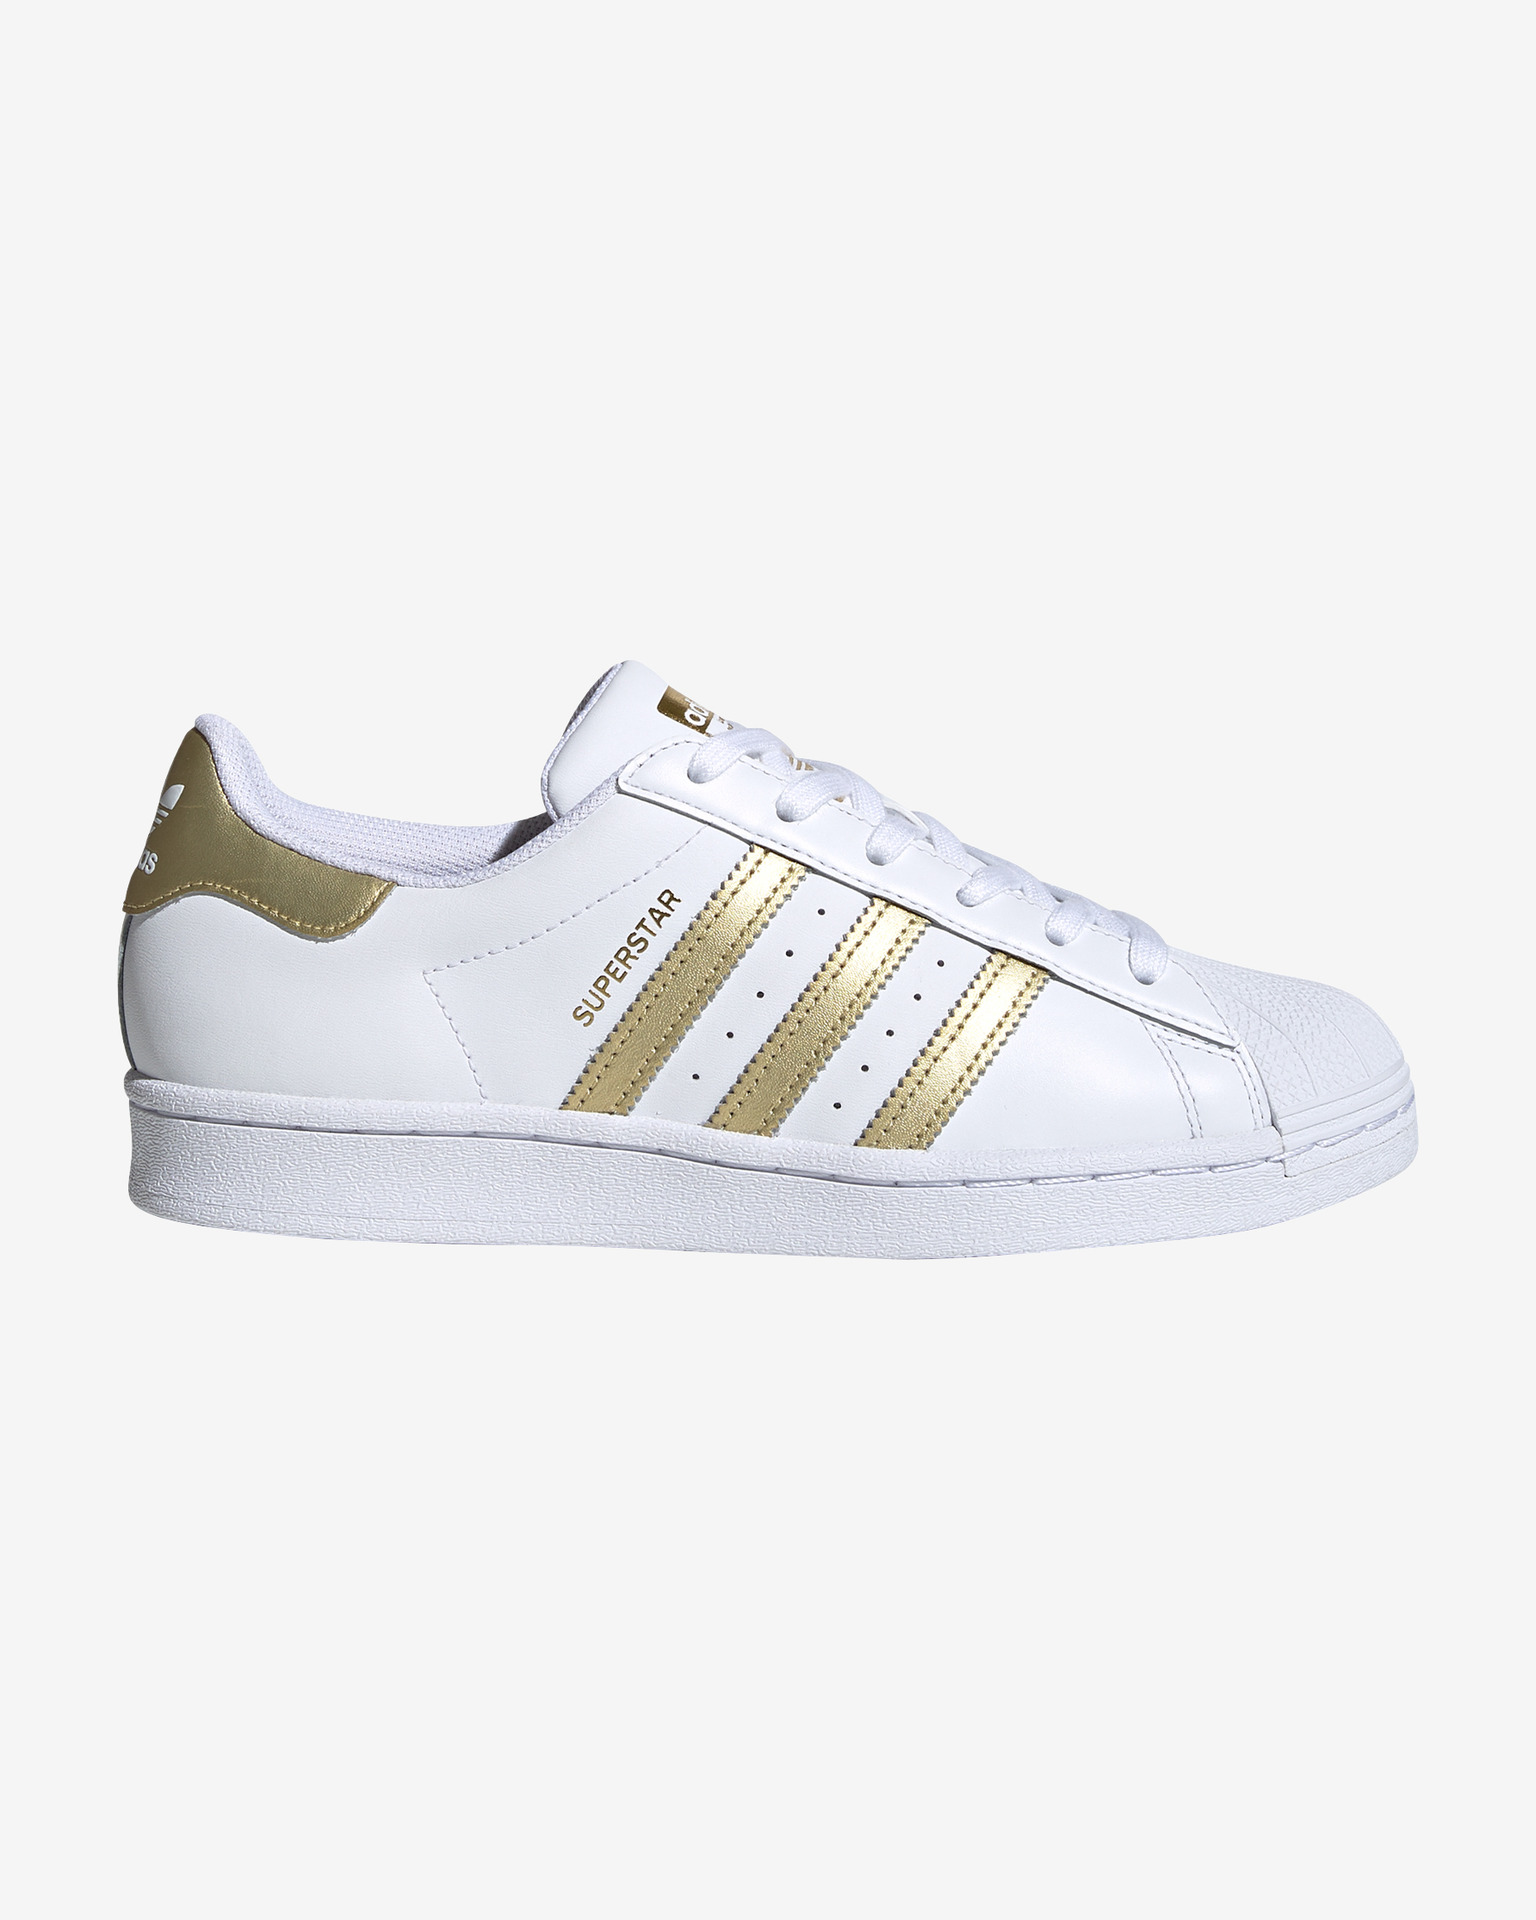 adidas Black Superstar Sneaker | Adidas outfit women, Black superstar, Adidas  shoes superstar